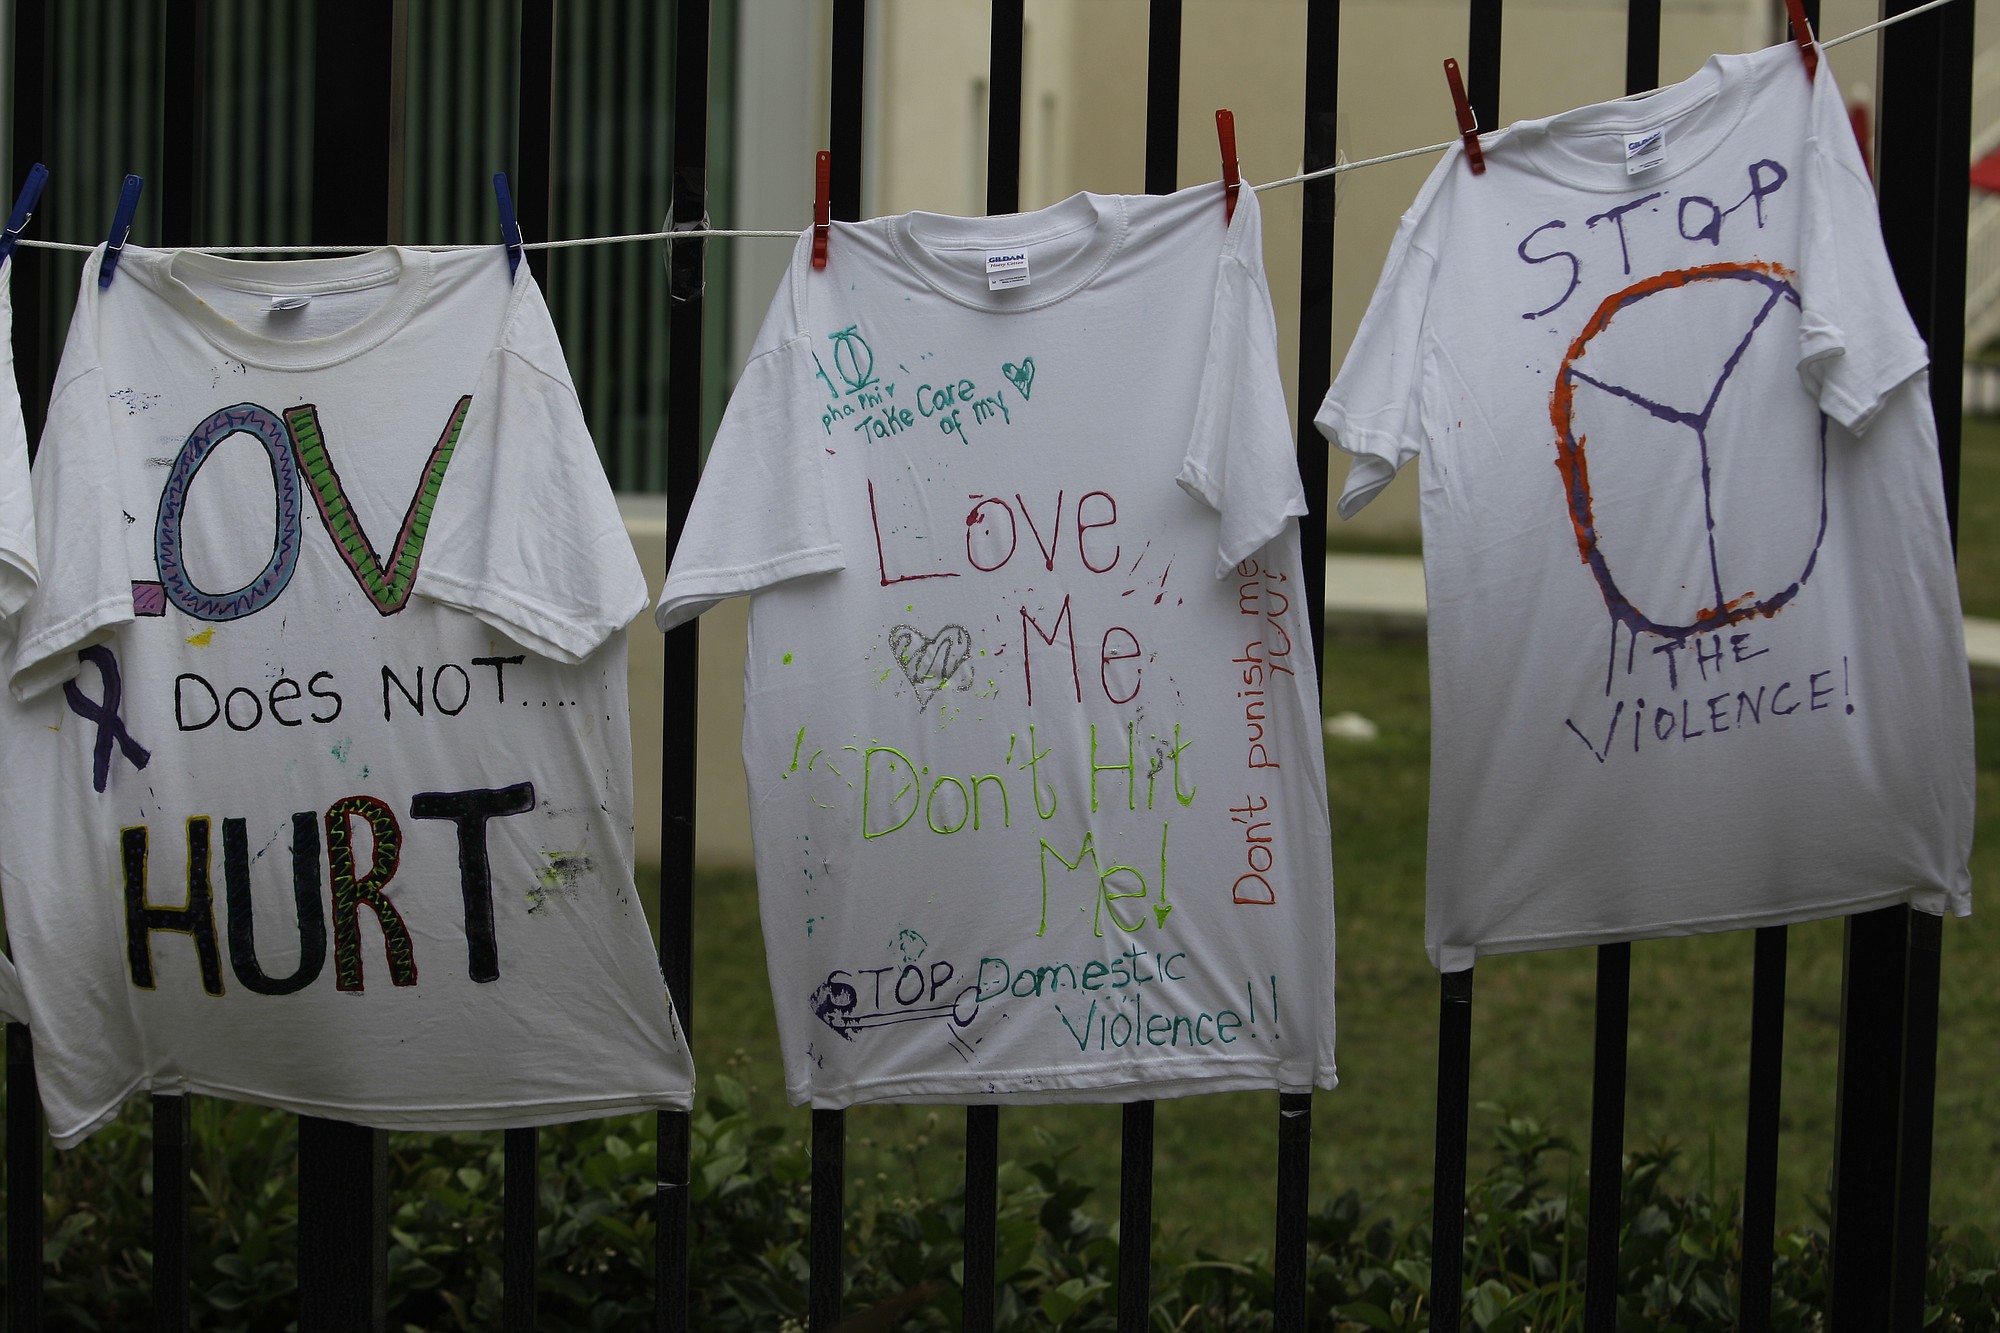 Decorated T-shirts hang Feb. 11 during Barry University's College Brides Walk, to bring awareness of domestic and dating violence in Miami.